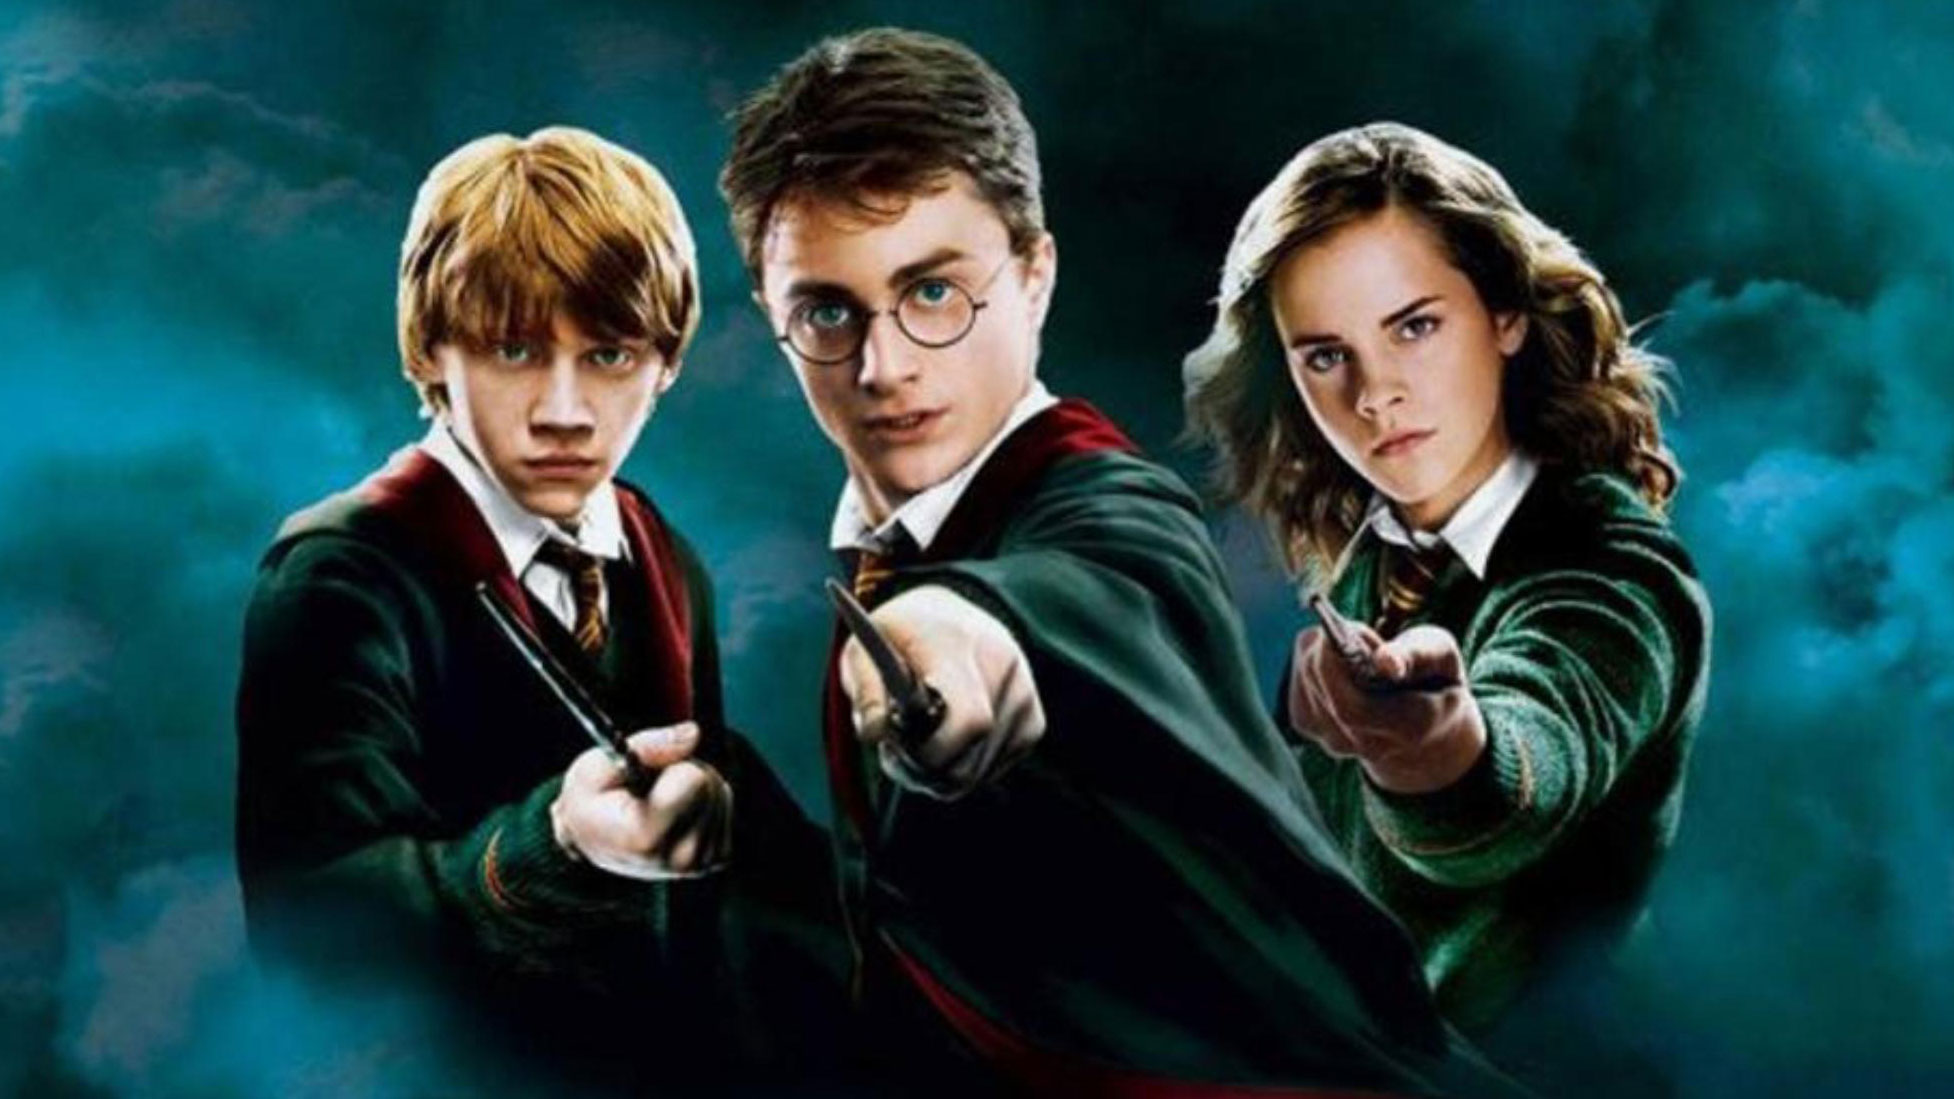 The Best Harry Potter Movies Every Film Ranked From Worst To Best Techradar